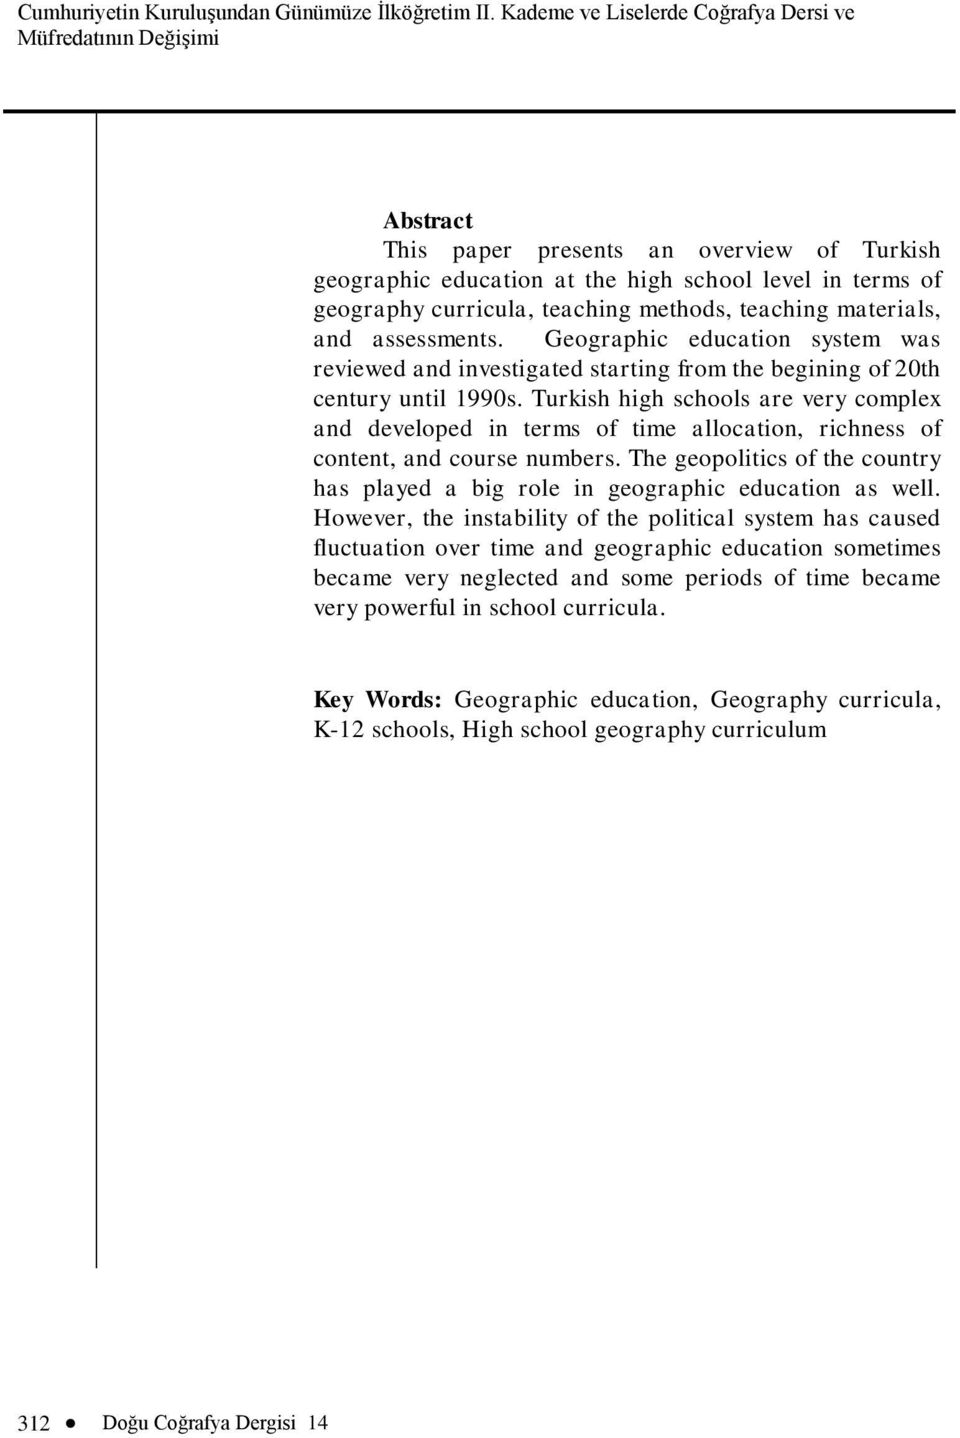 methods, teaching materials, and assessments. Geographic education system was reviewed and investigated starting from the begining of 20th century until 1990s.